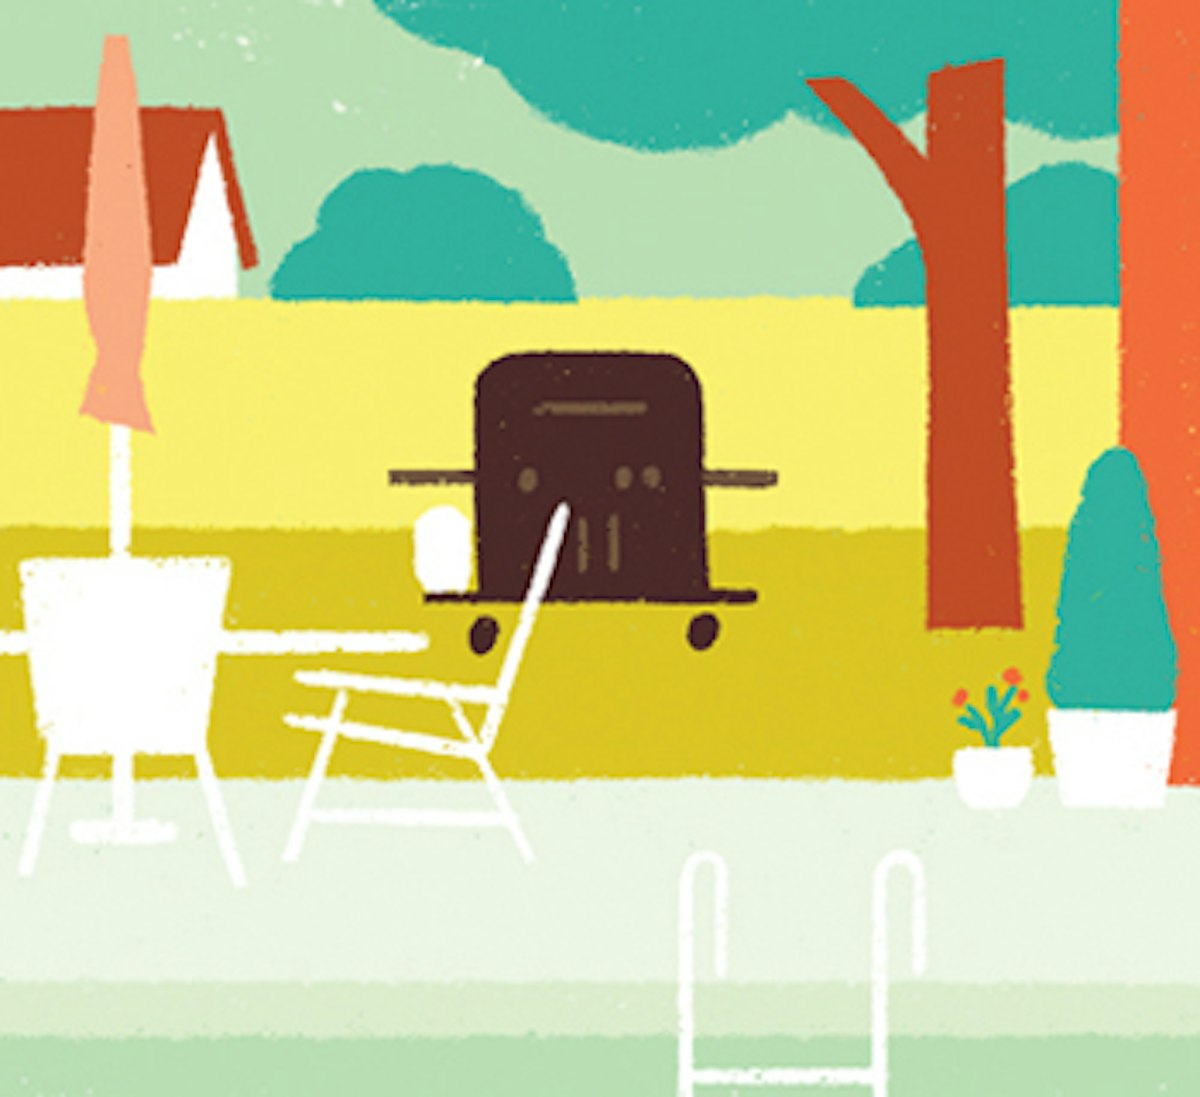 An illustration of a backyard with a table, chairs, and a grill.